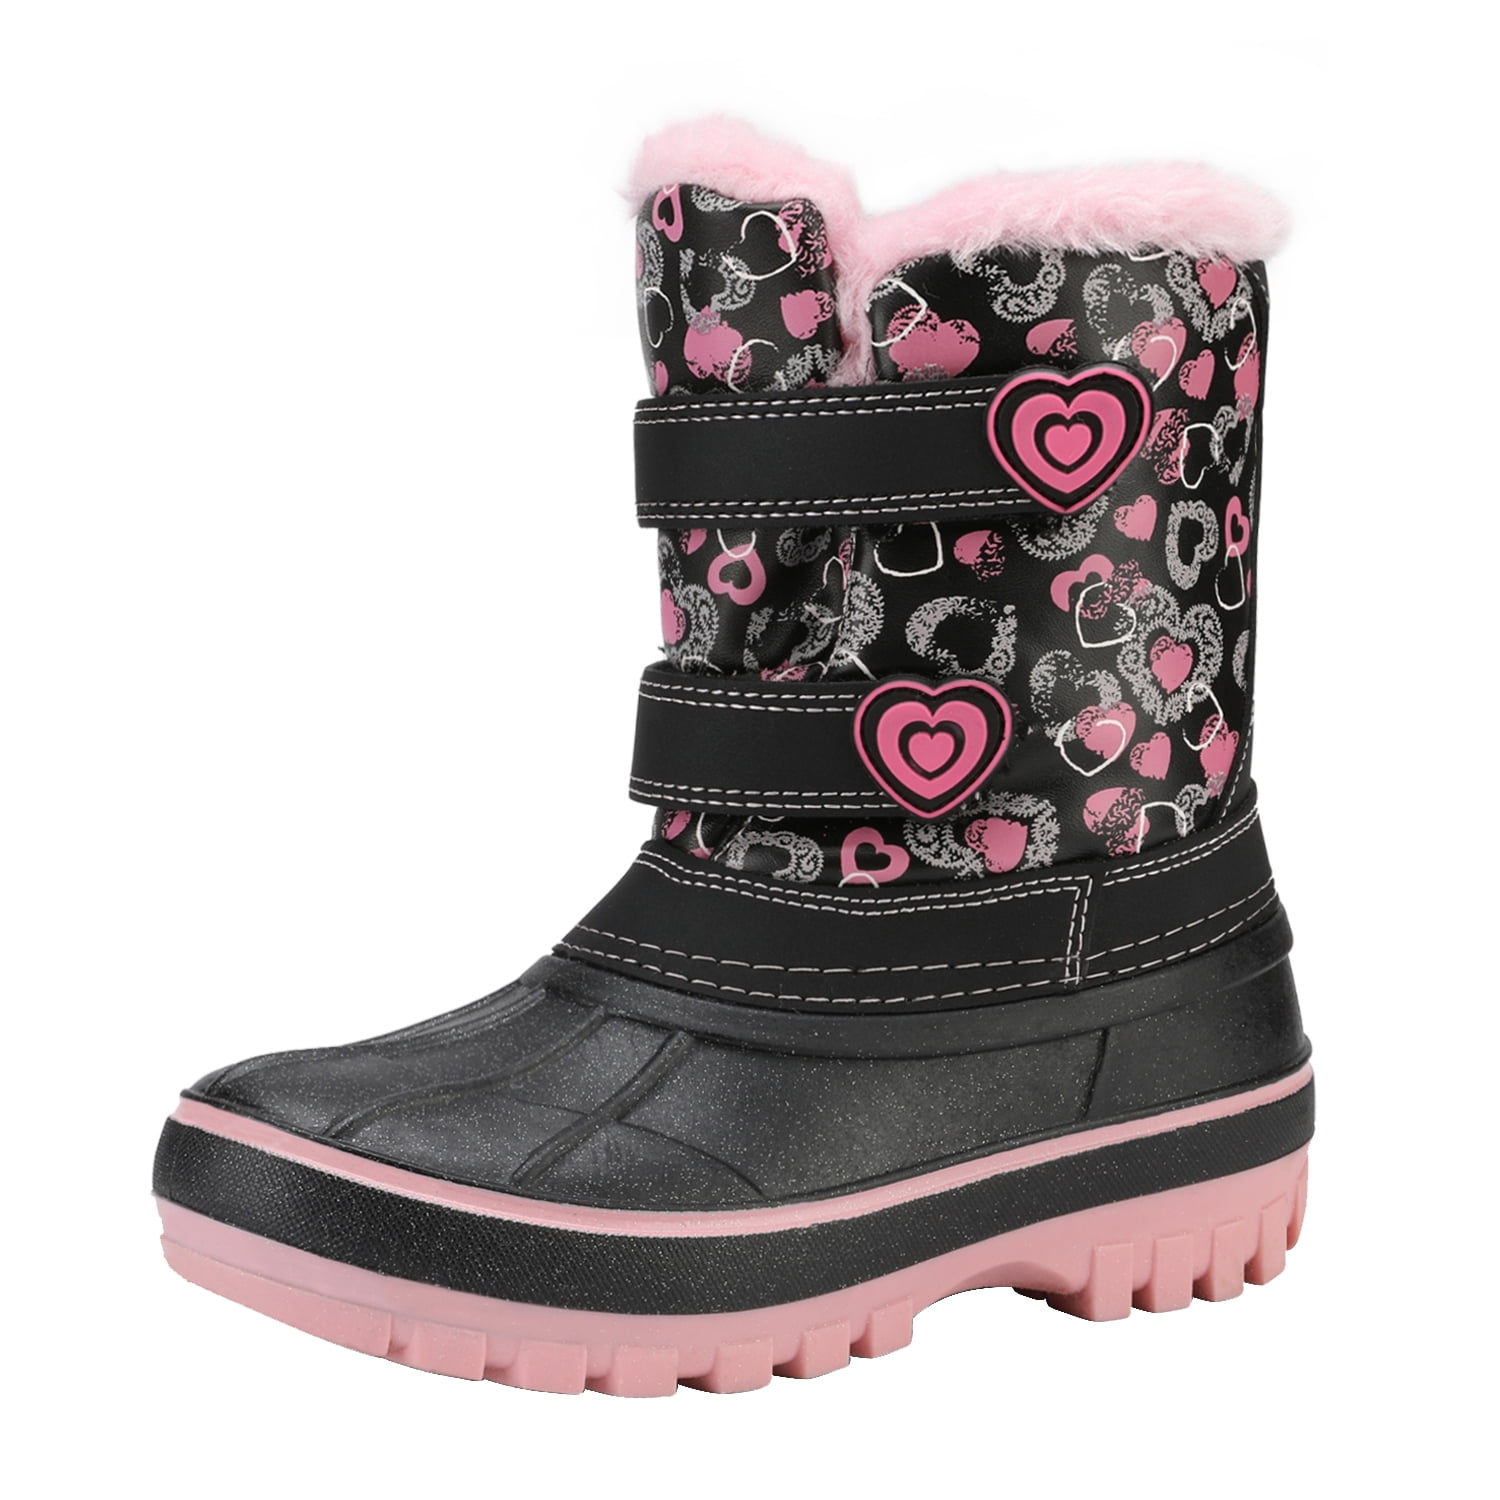 DREAM PAIRS Boys Girls Mid Calf Insulated Waterproof Winter Snow Boots（Toddler/Little Kid/Big Kid）